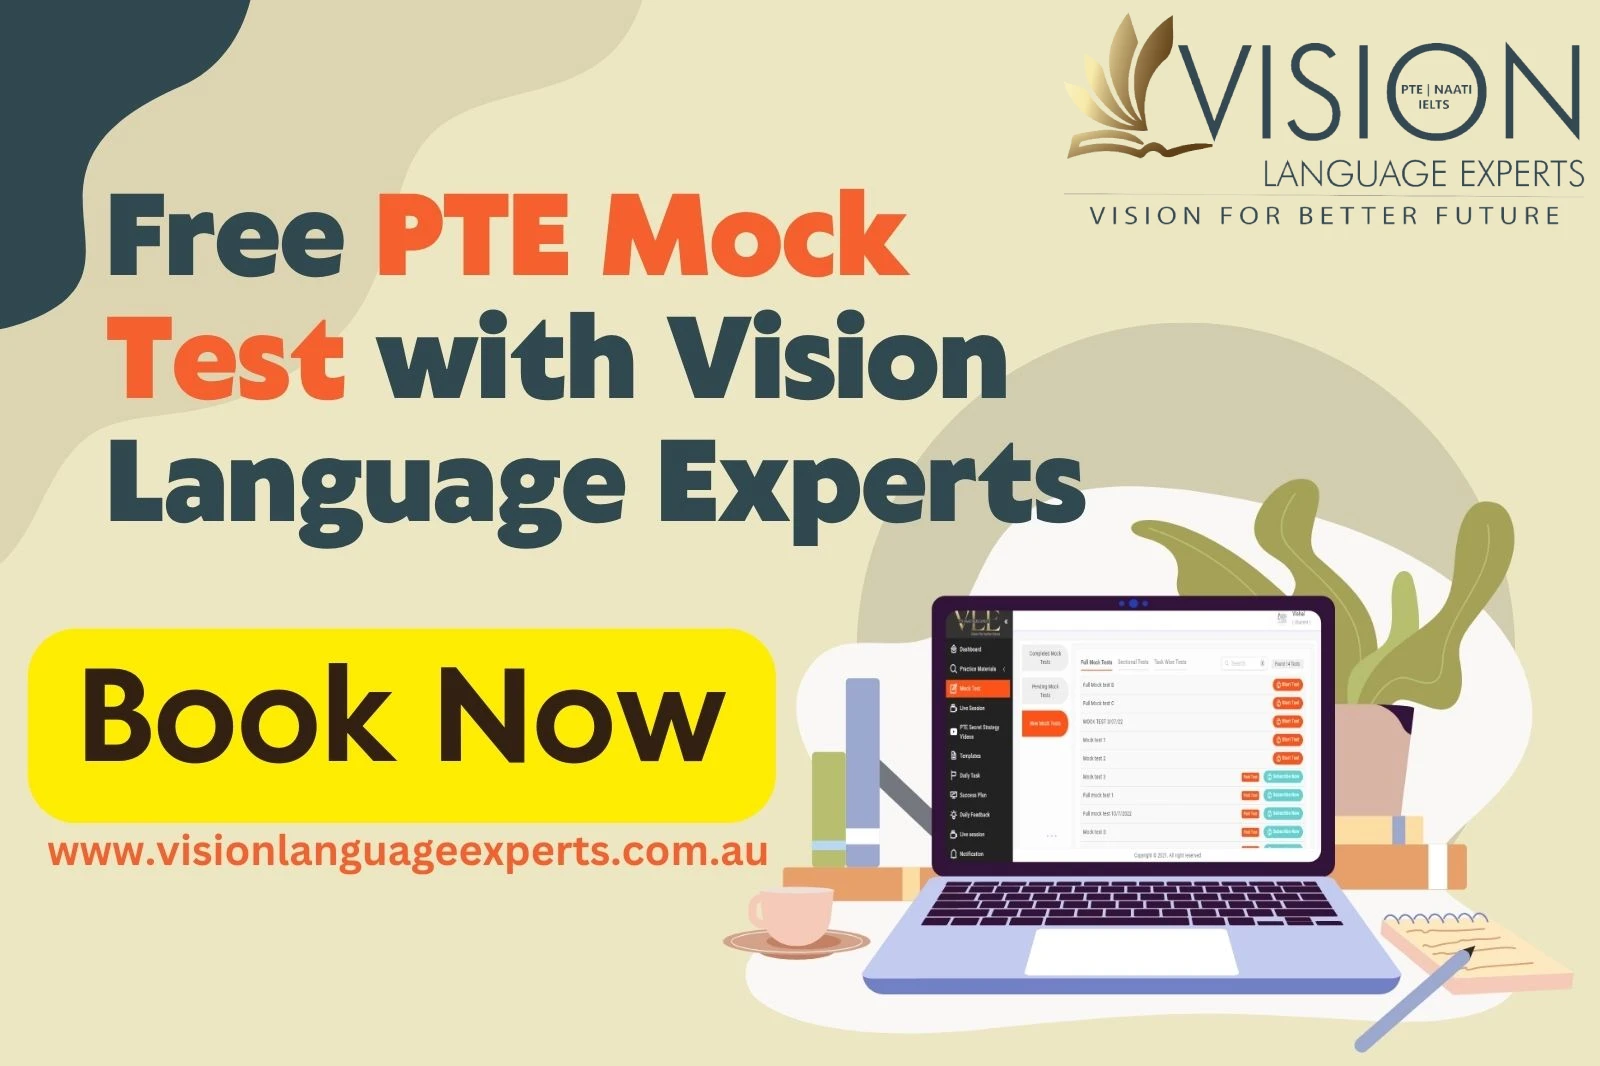 Sharpen Your Skills with a Free PTE Mock Test